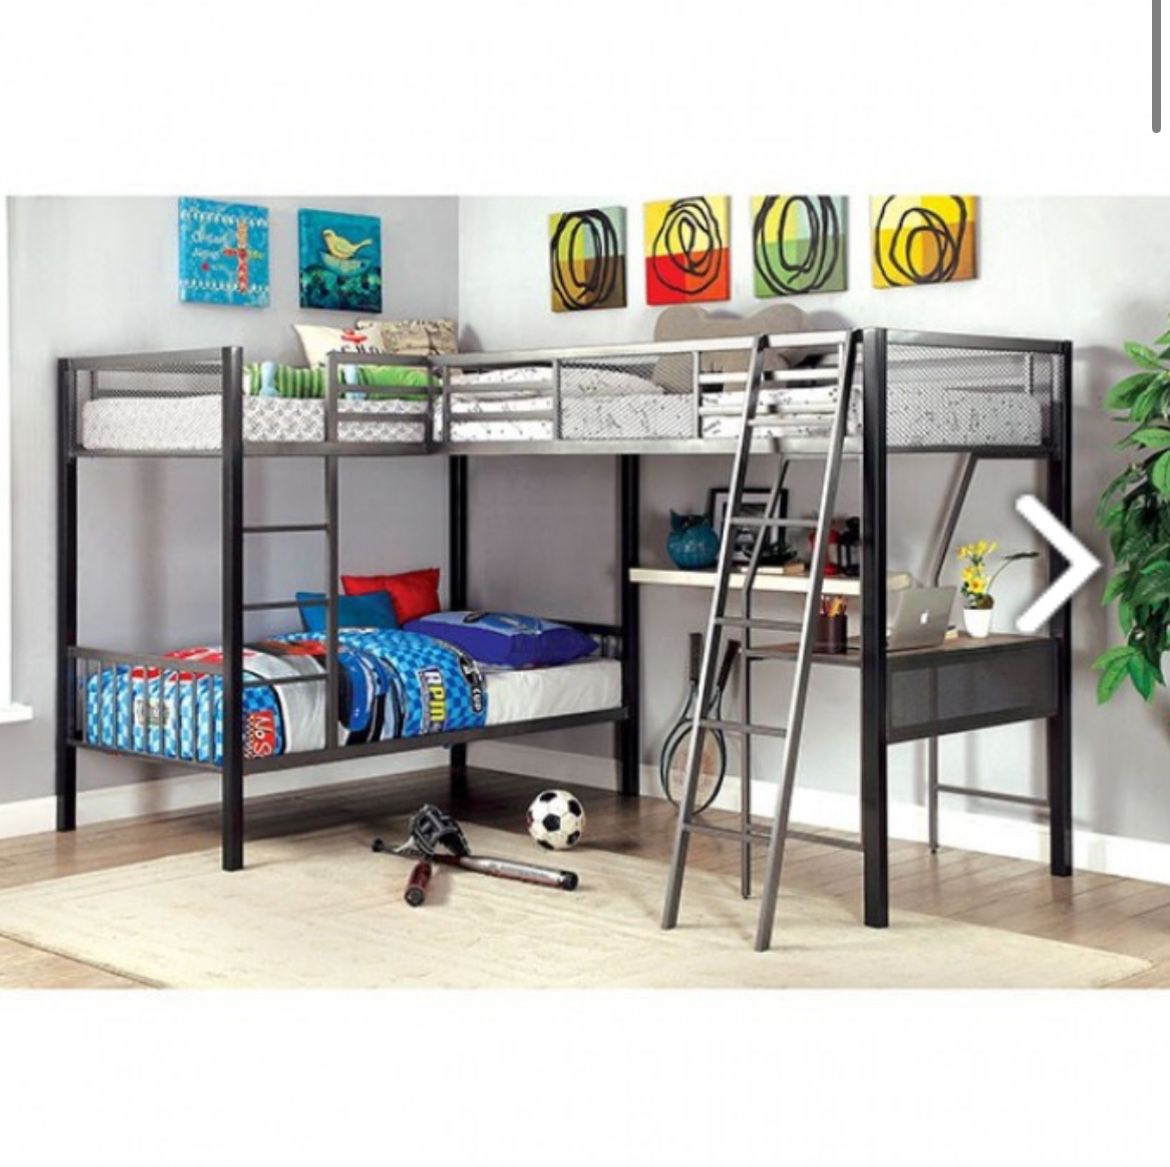 Triple Bunk Bed With Desk